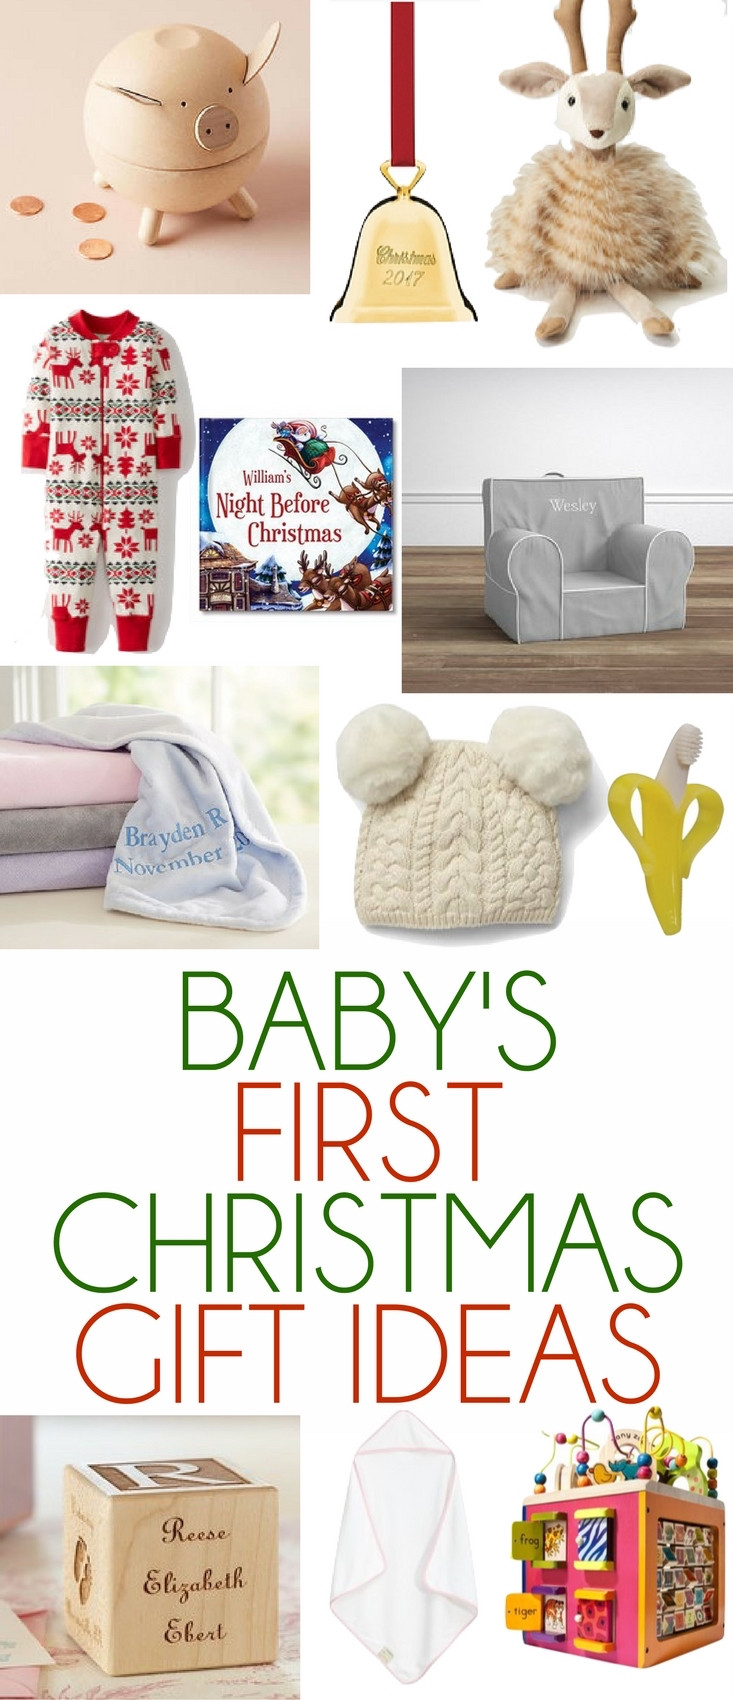 First Christmas Gift Ideas
 Baby s First Christmas Gift Ideas Lovely Lucky Life